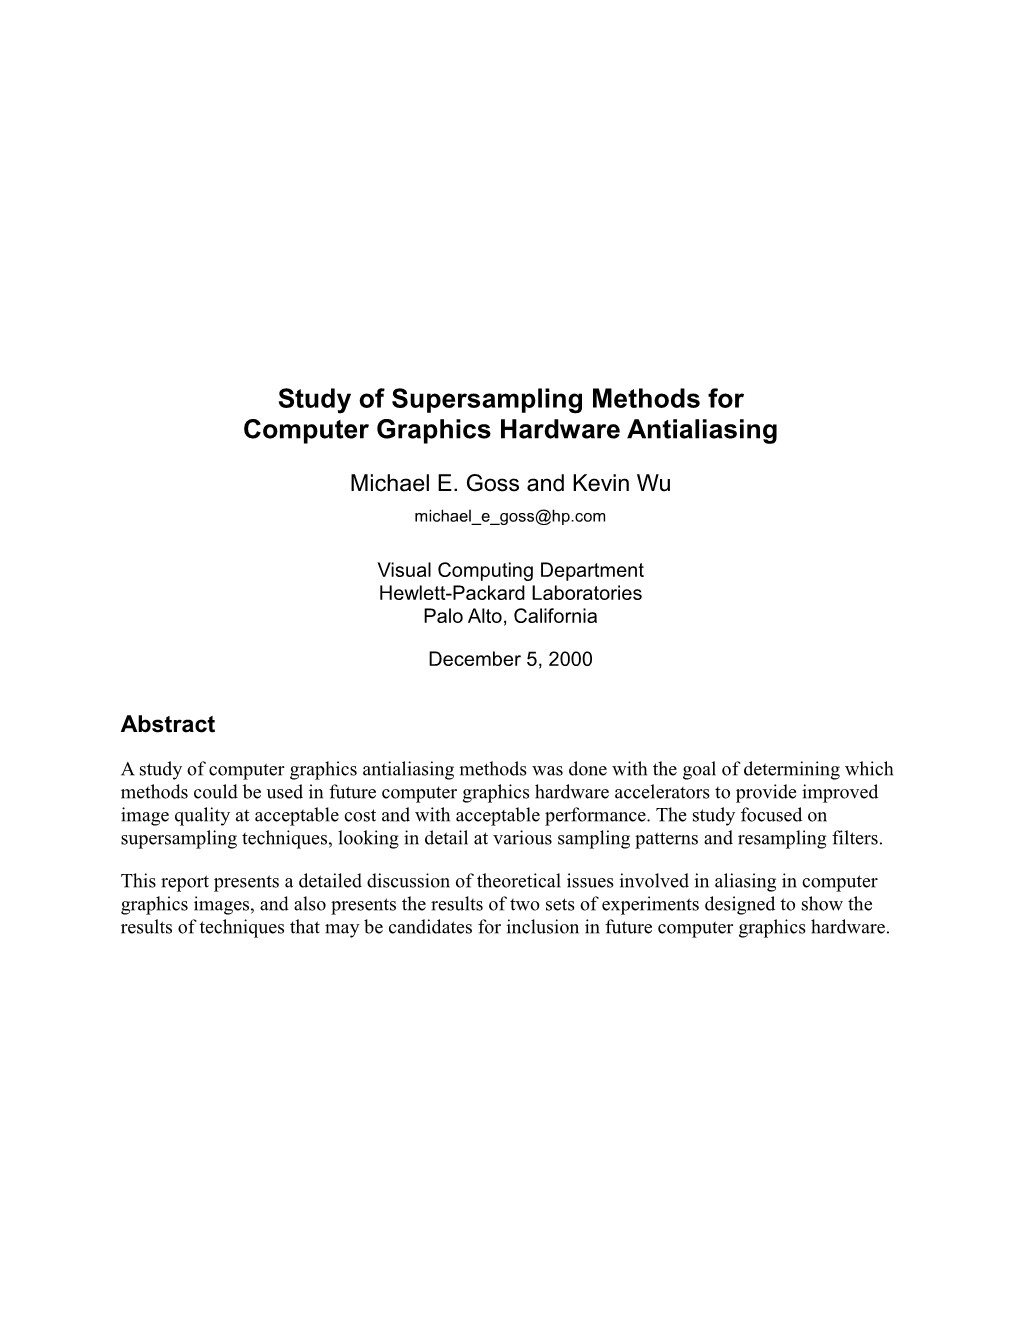 Study of Supersampling Methods for Computer Graphics Hardware Antialiasing